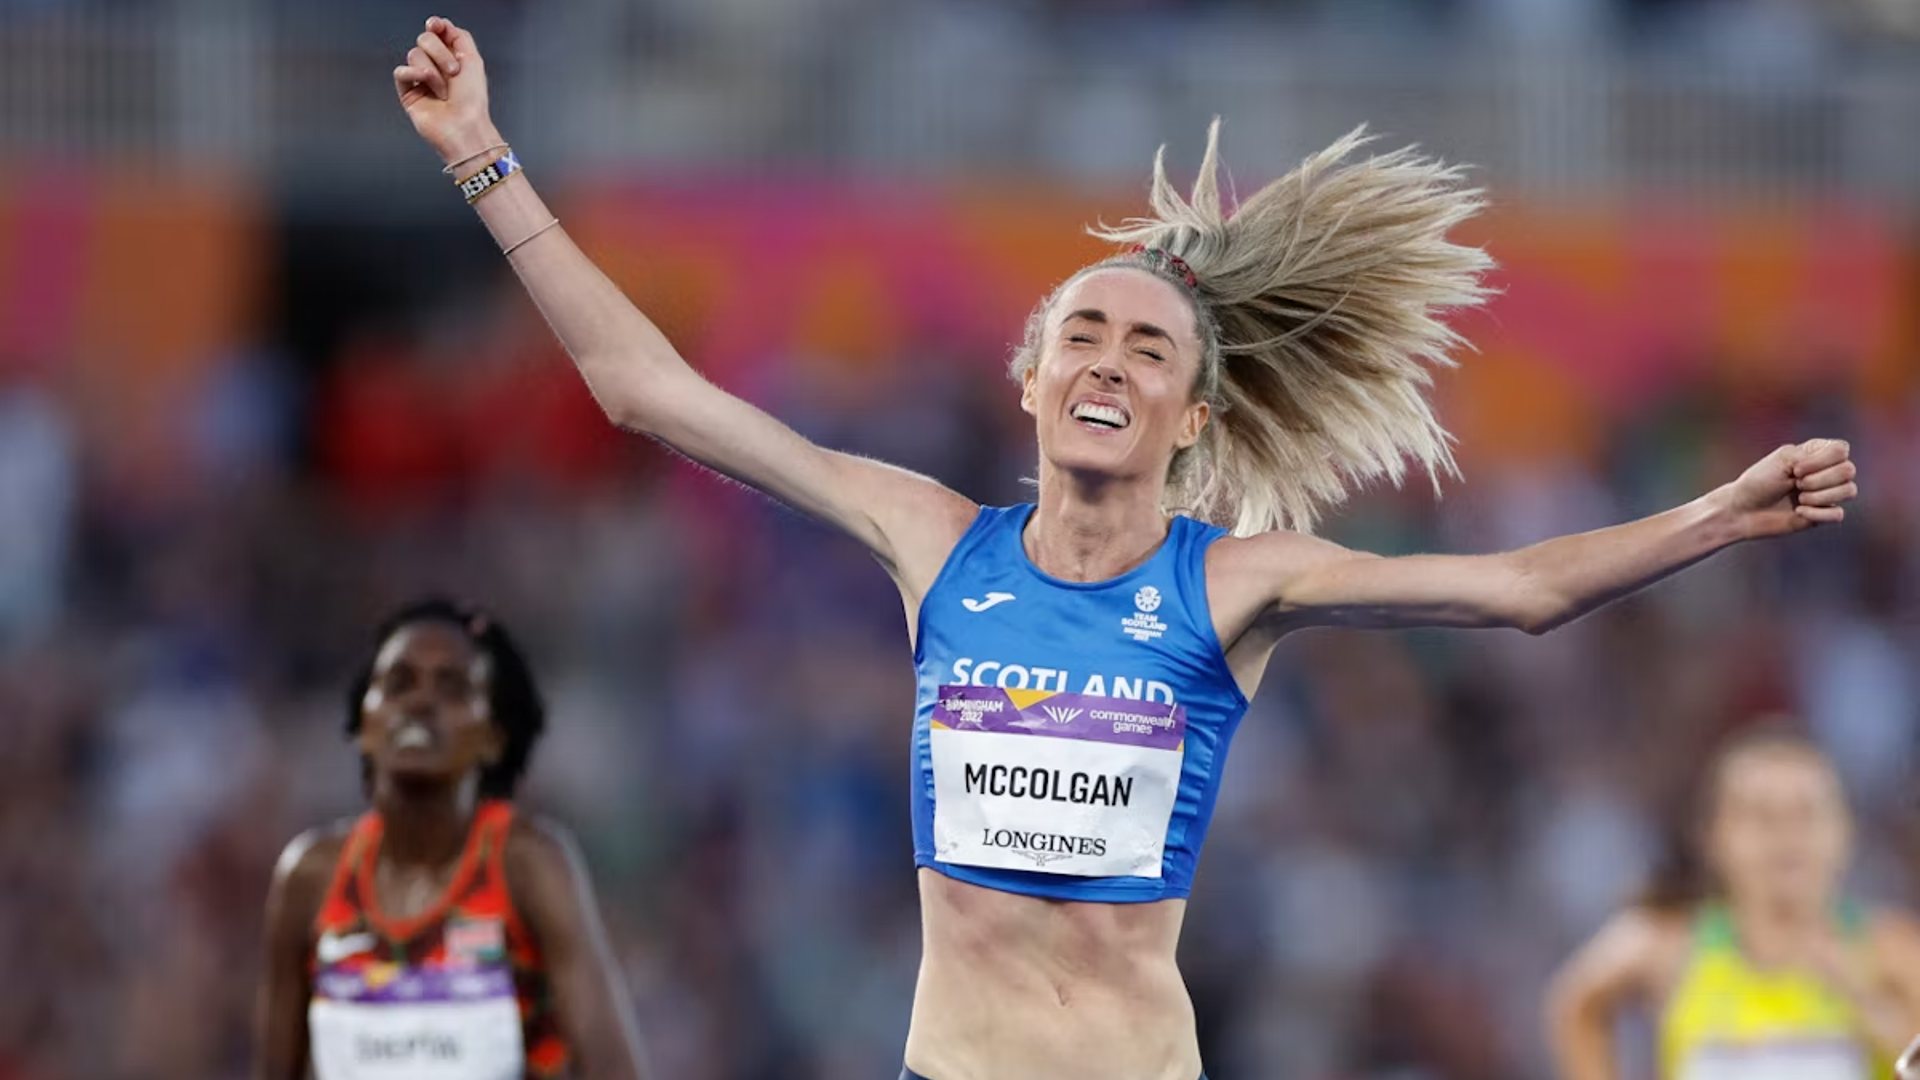 Eilish McColgan after winning her first major title at Commonwealth Games 2022 (McColgan in a file photo; Image Credits - Twitter)